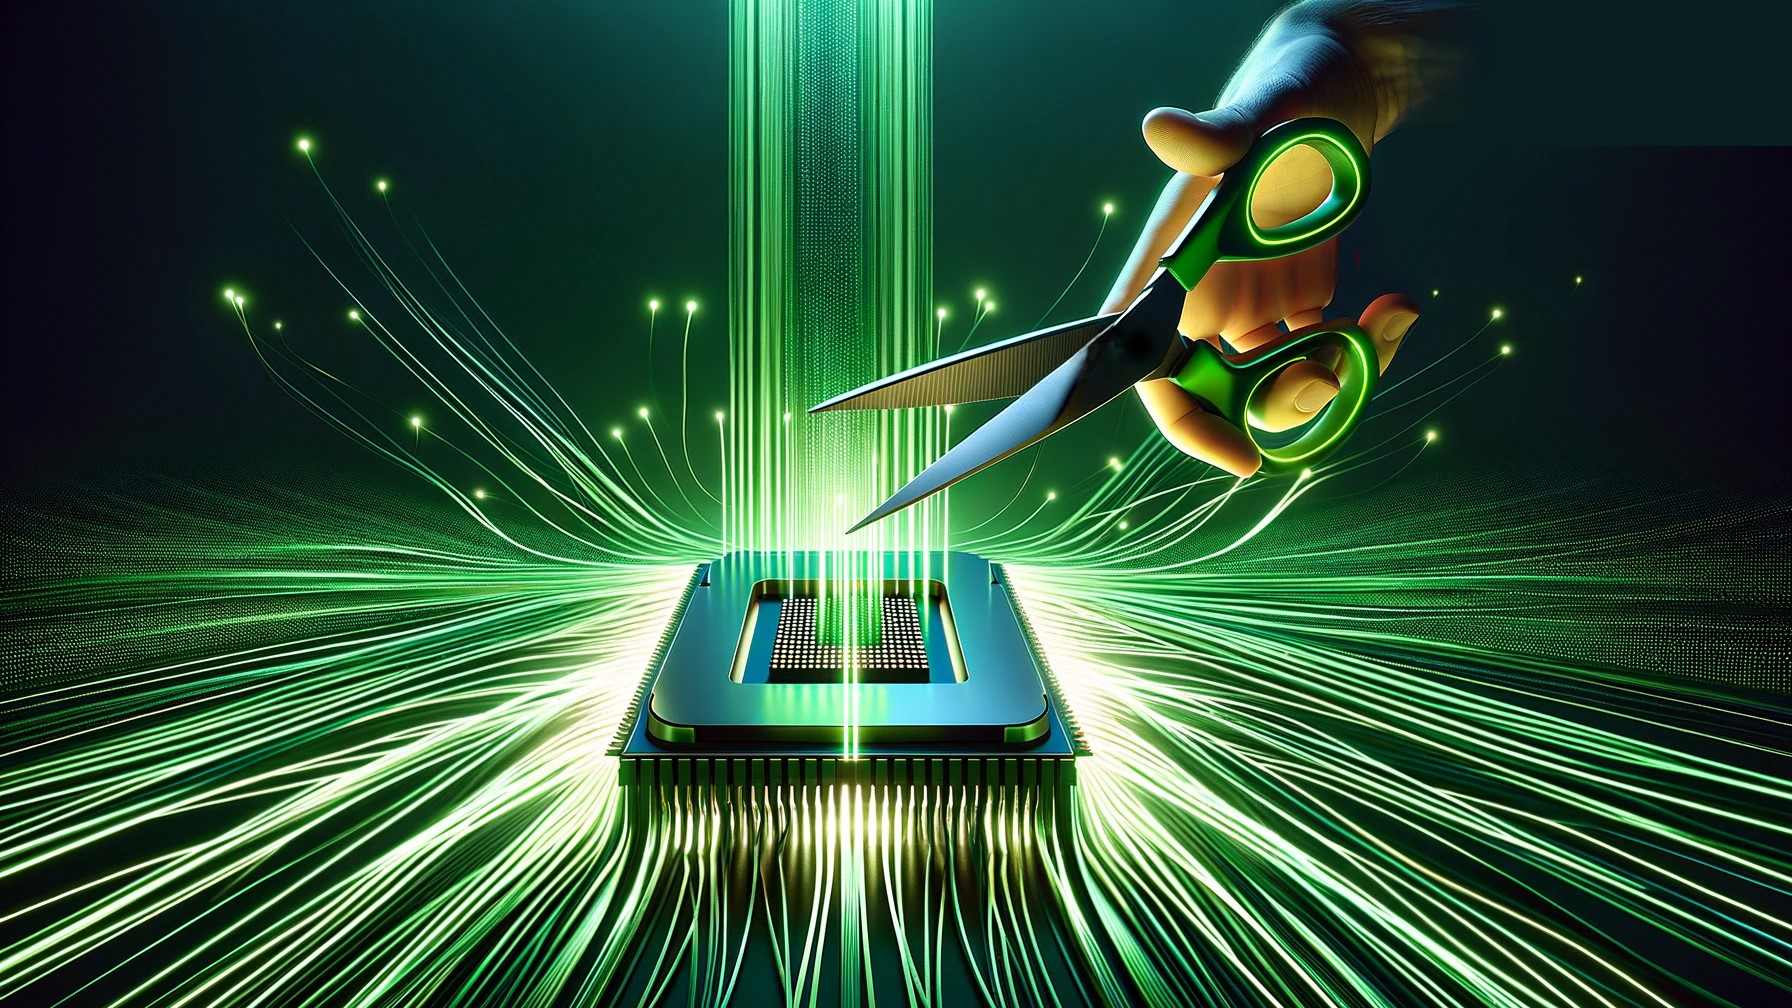 Decorative image of scissors near a CPU with green light streaming out.